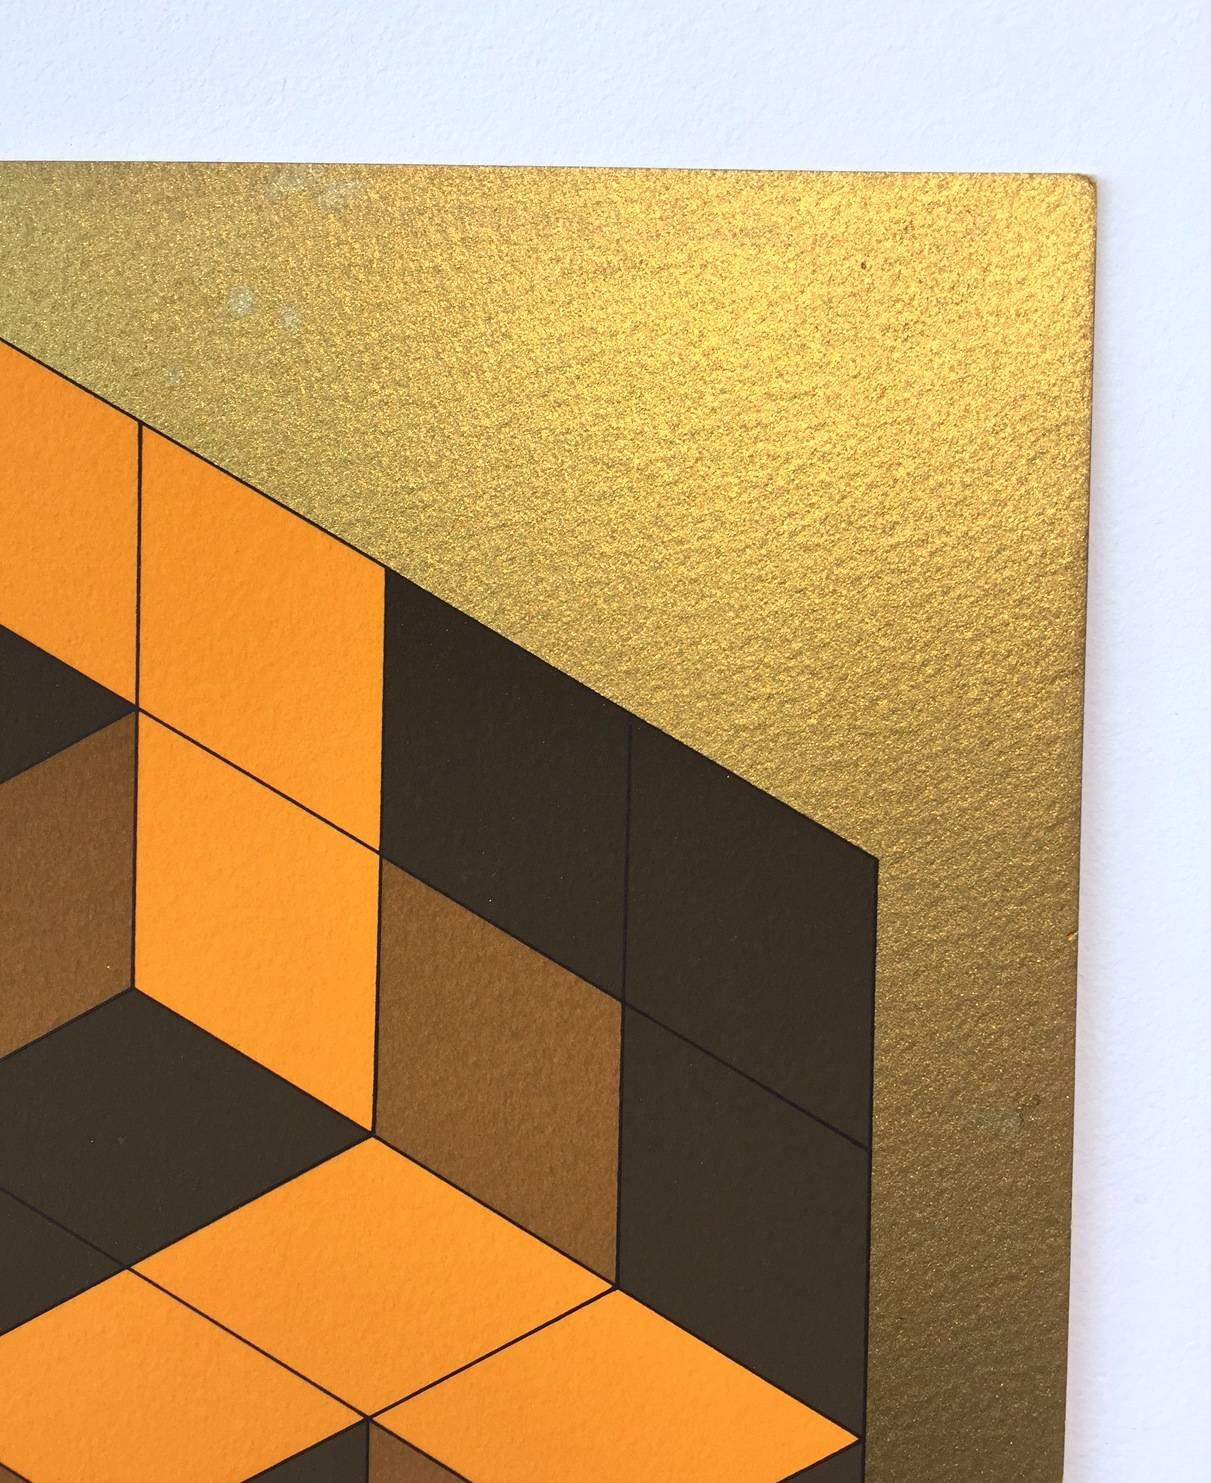 TECHNICAL INFORMATION:

Victor Vasarely
Composition Gold
1980
Screenprint
13 x 10 in.
Edition of 50
Pencil signed and numbered


Accompanied with COA by Gregg Shienbaum Fine Art. 


Condition: This work is in excellent condition. It has never been